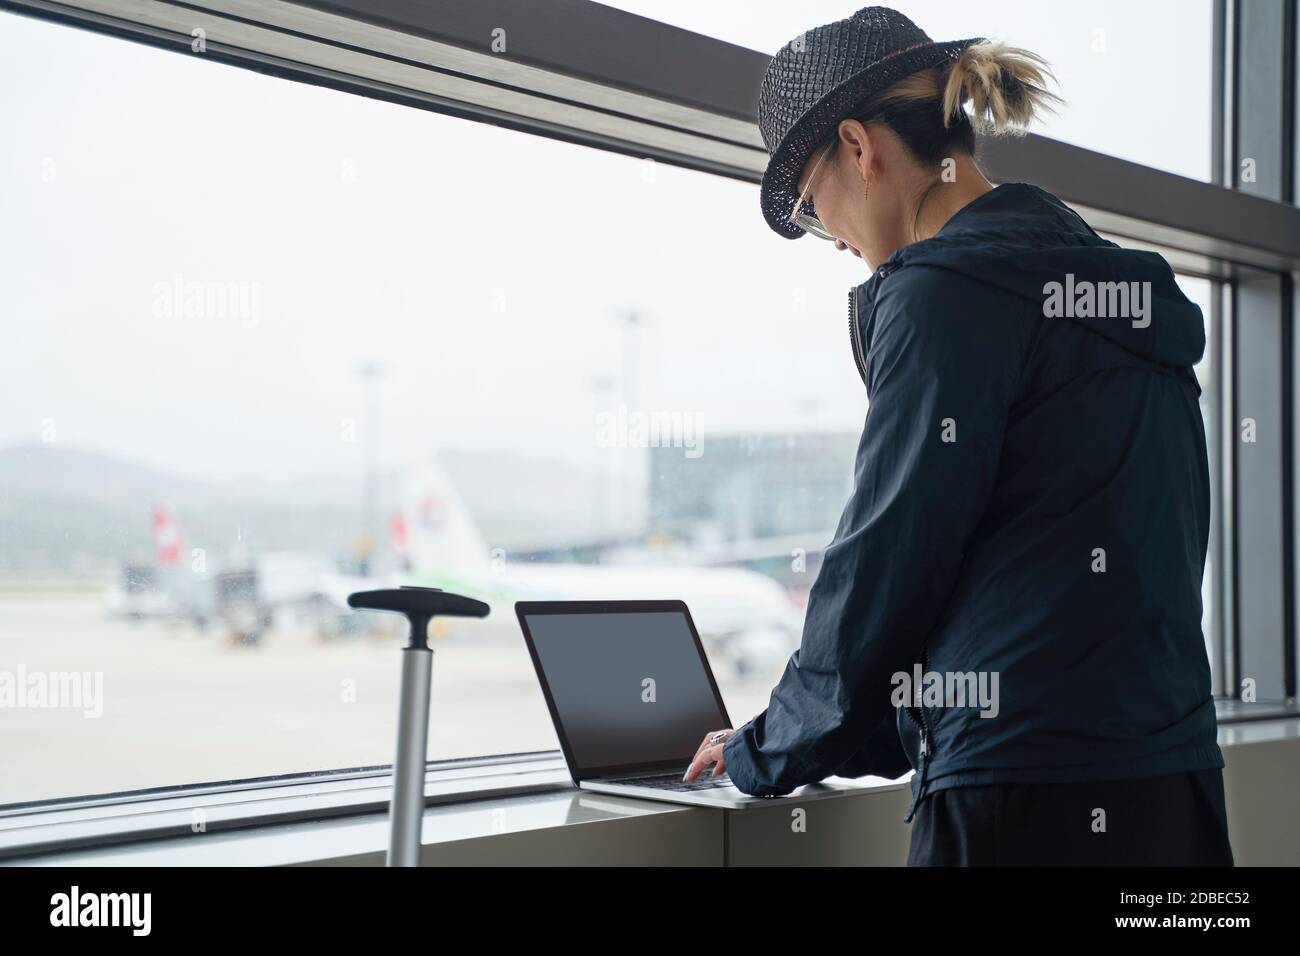 young asian woman female air traveler using laptop while waiting for boarding in airport terminal building Stock Photo